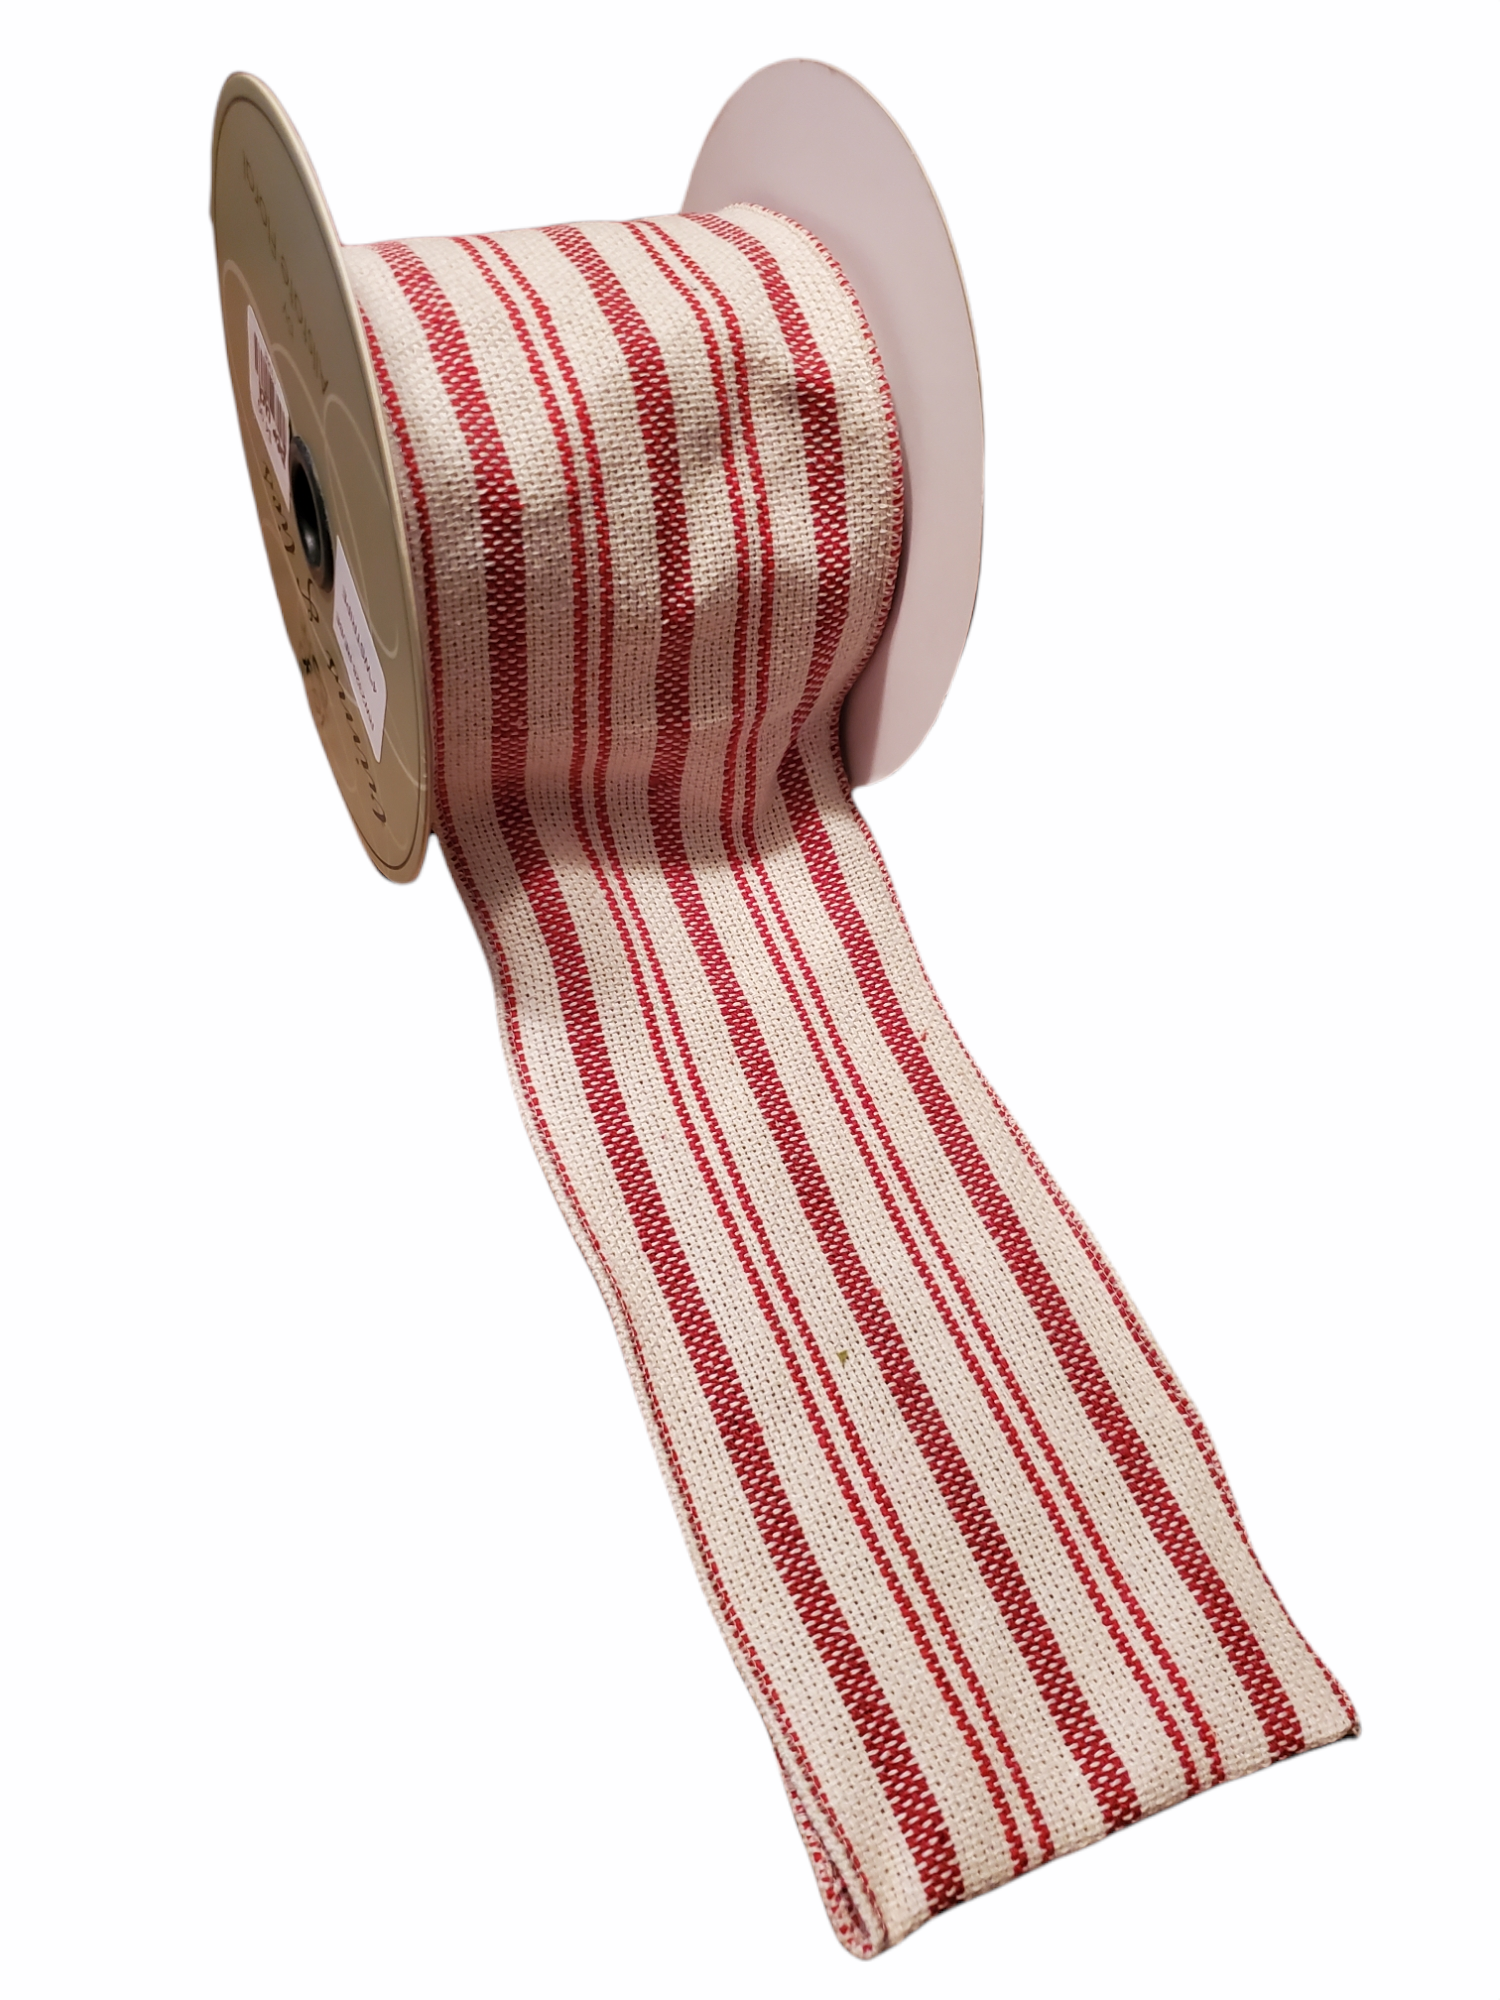 Wired Red & Gold Plaid Christmas Ribbon 1.5 wide BY THE YARD